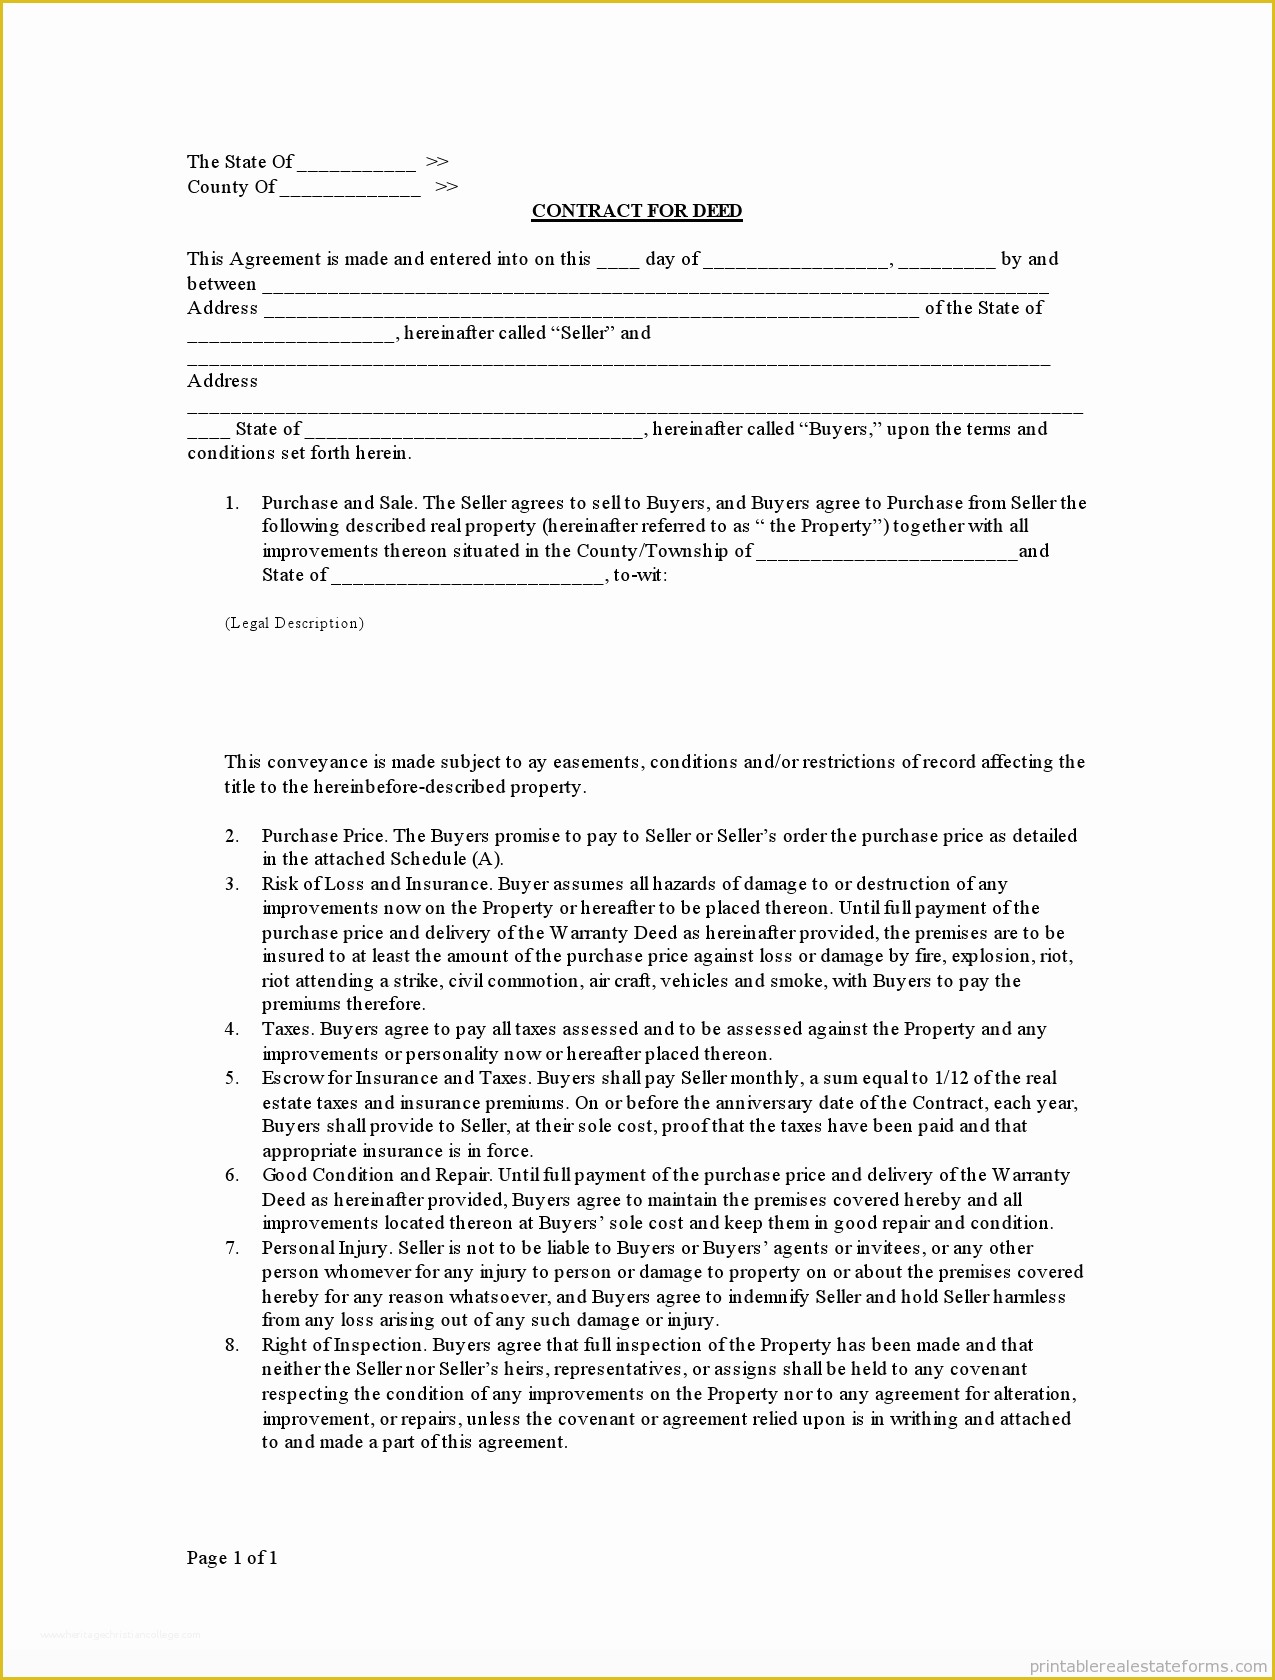 Free Printable Contract for Deed Template Of Free Printable Contract for Deed form Basic Templates